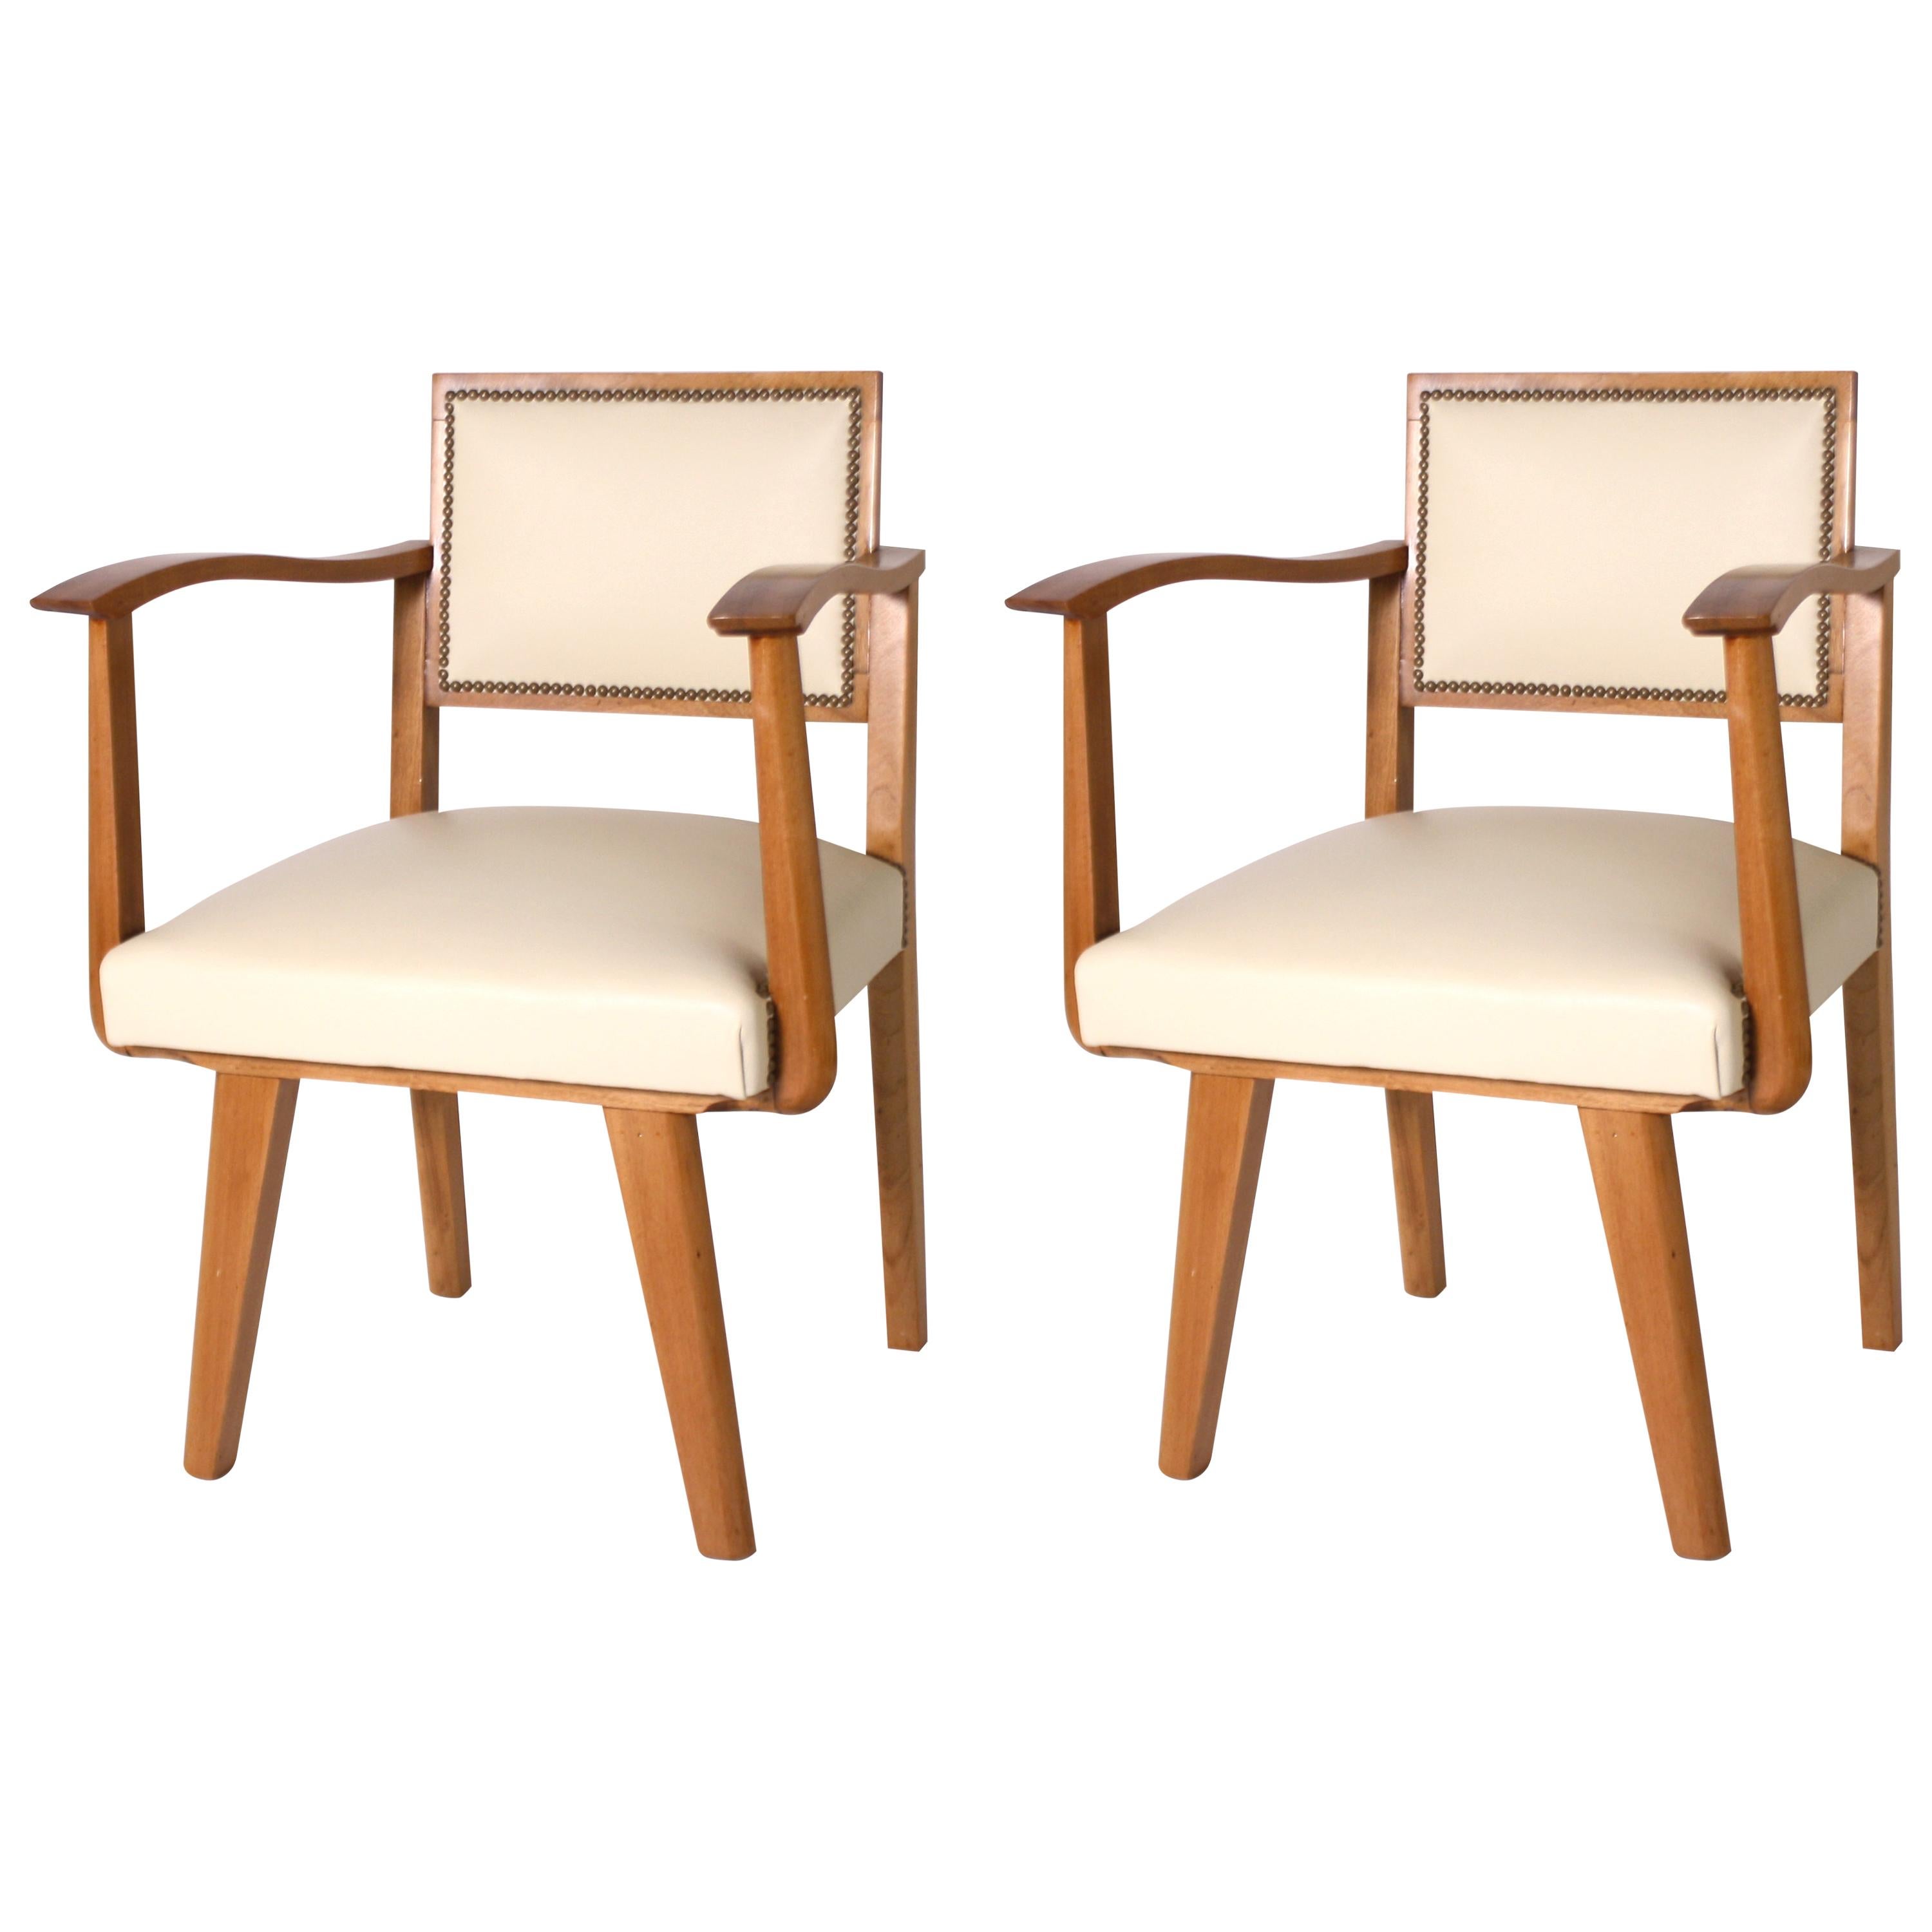 Pair of Wood Frame Armchairs with Leather, circa 1960